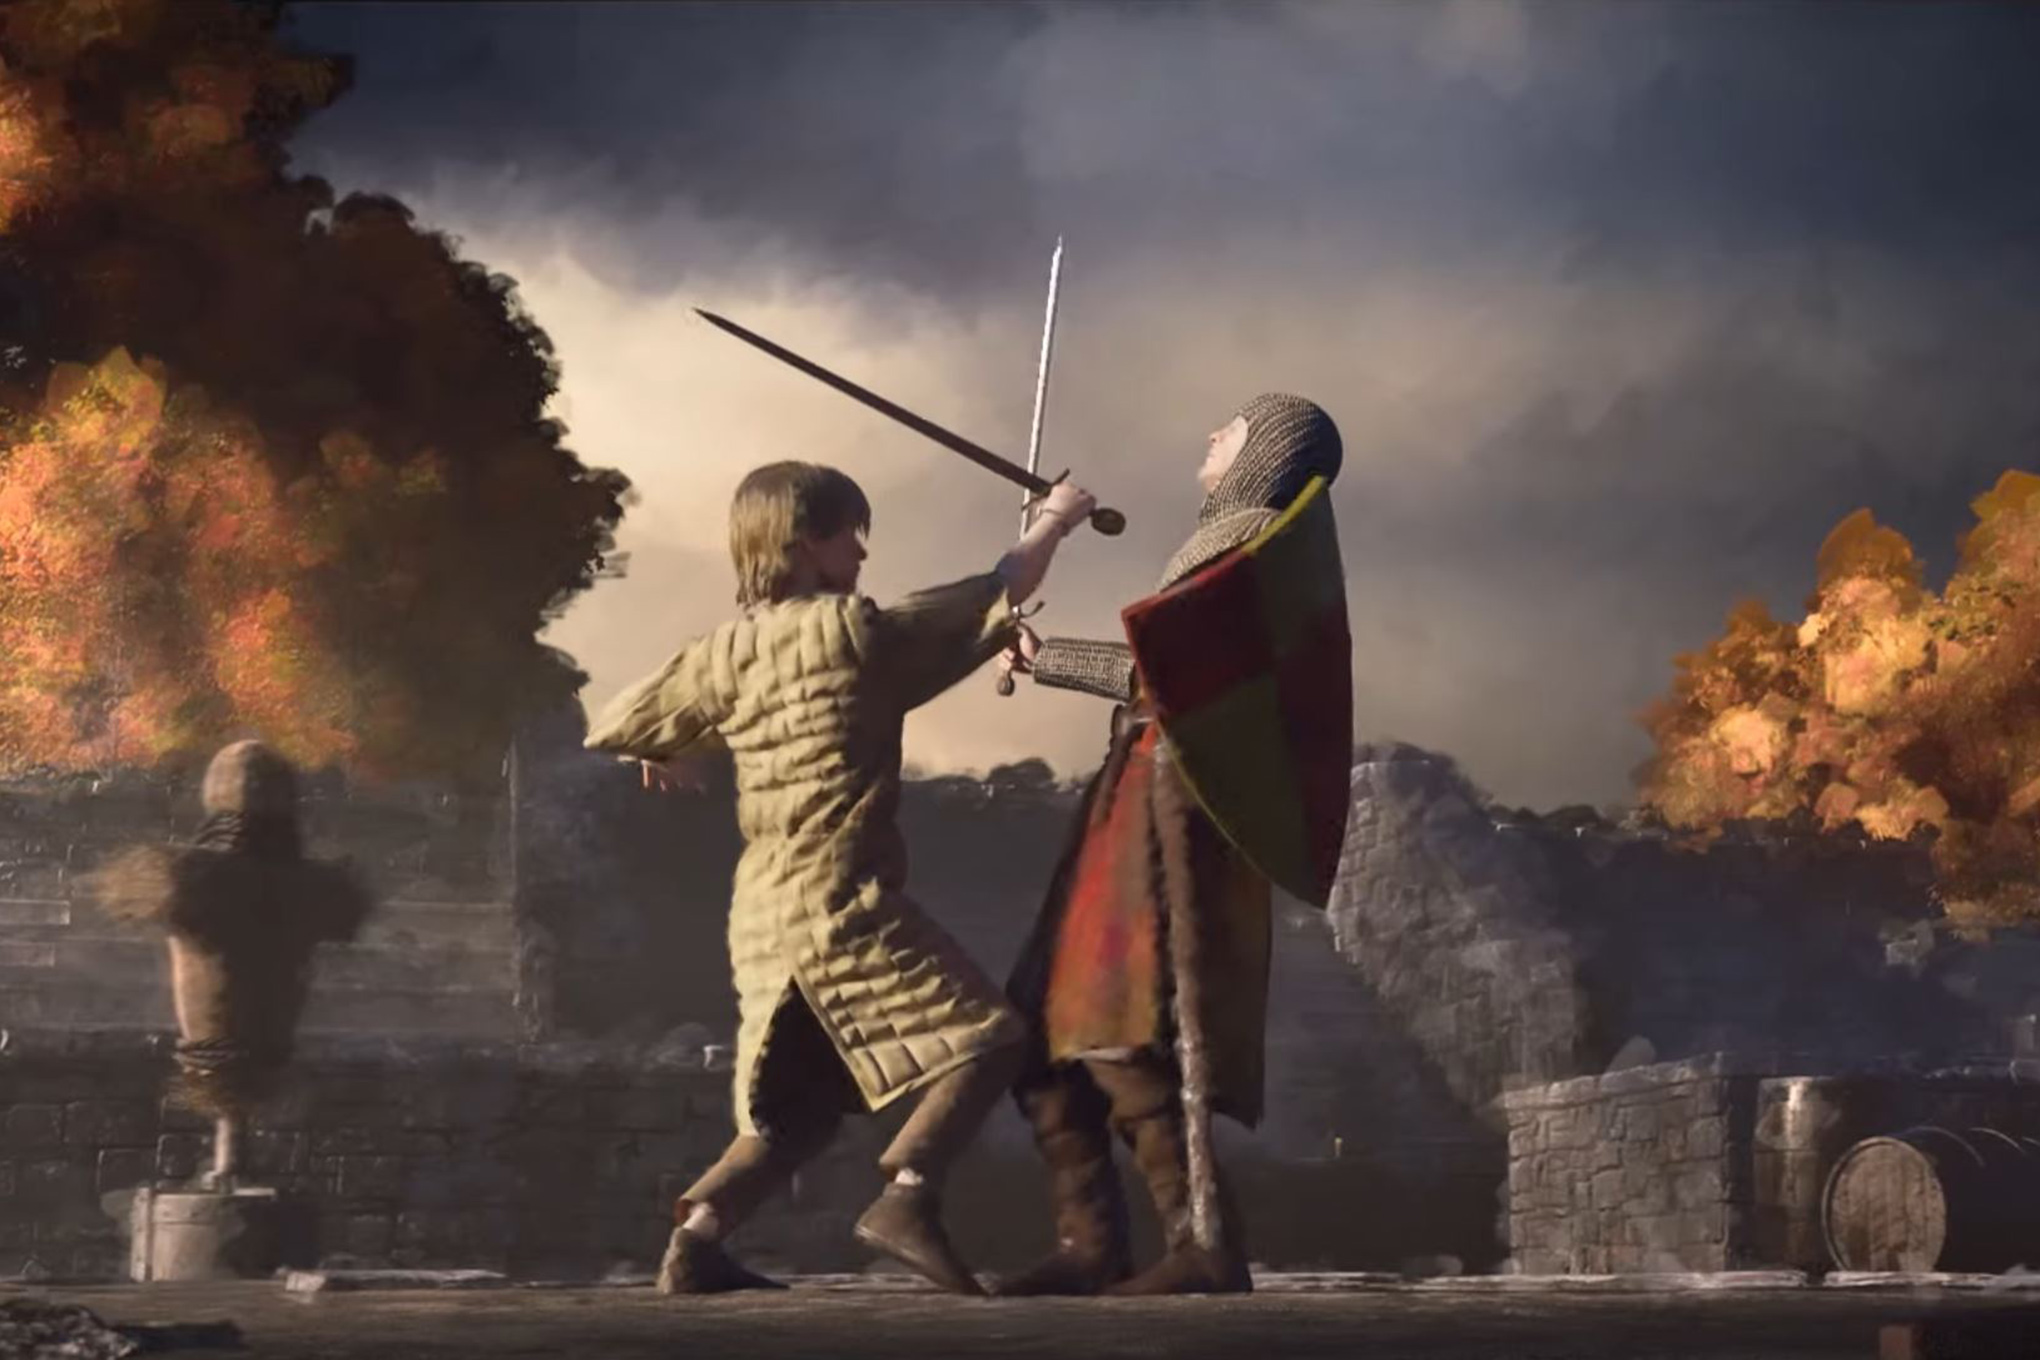 A still frame from the Crusader Kings 3 launch date reveal trailer shows a young prince training with a sword and shield.